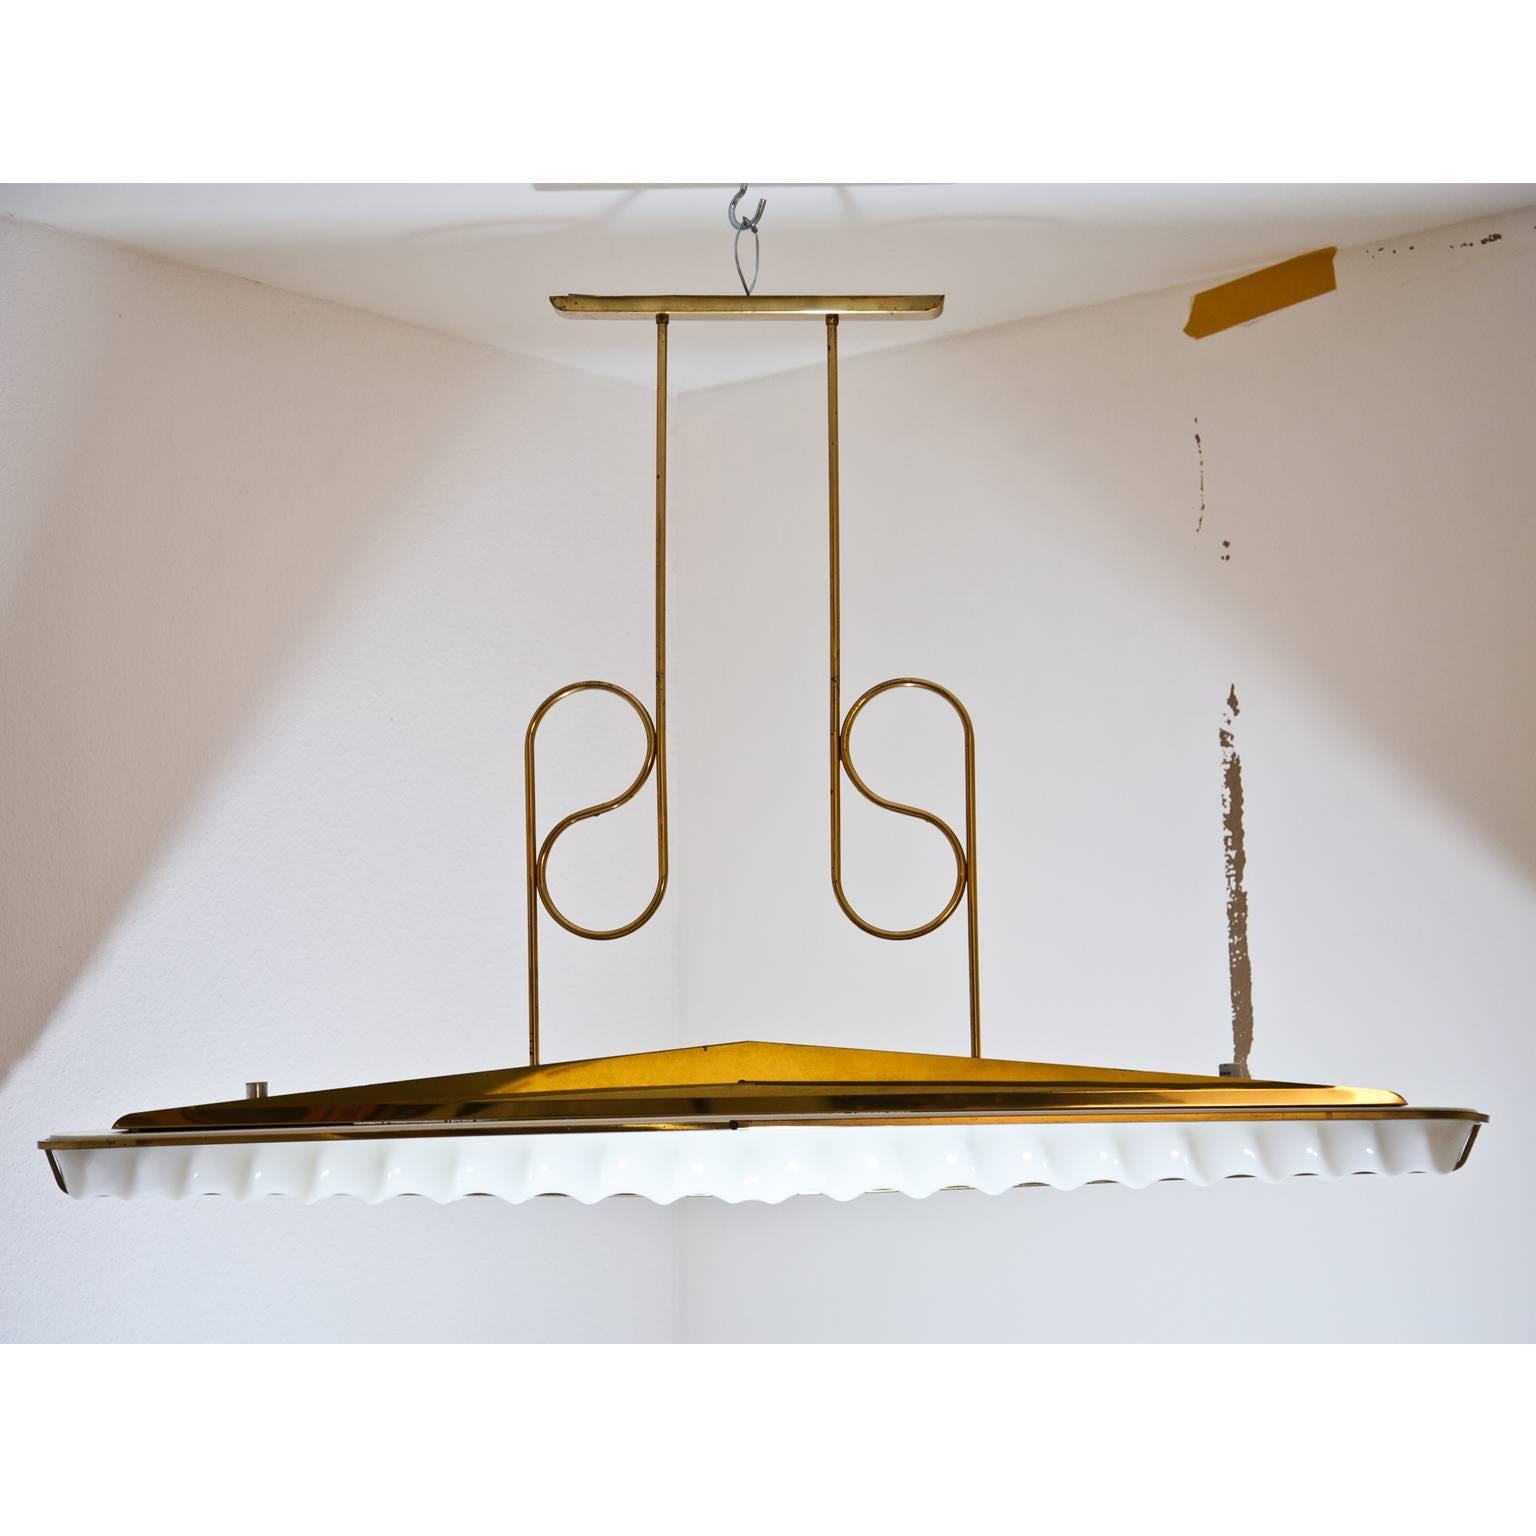 Large ceiling light with a pediment shaped body and S-shaped poles. The wavy lampshade is out of opaque glass. The long but narrow shape of the lamp makes it ideal for lighting dining room tables.